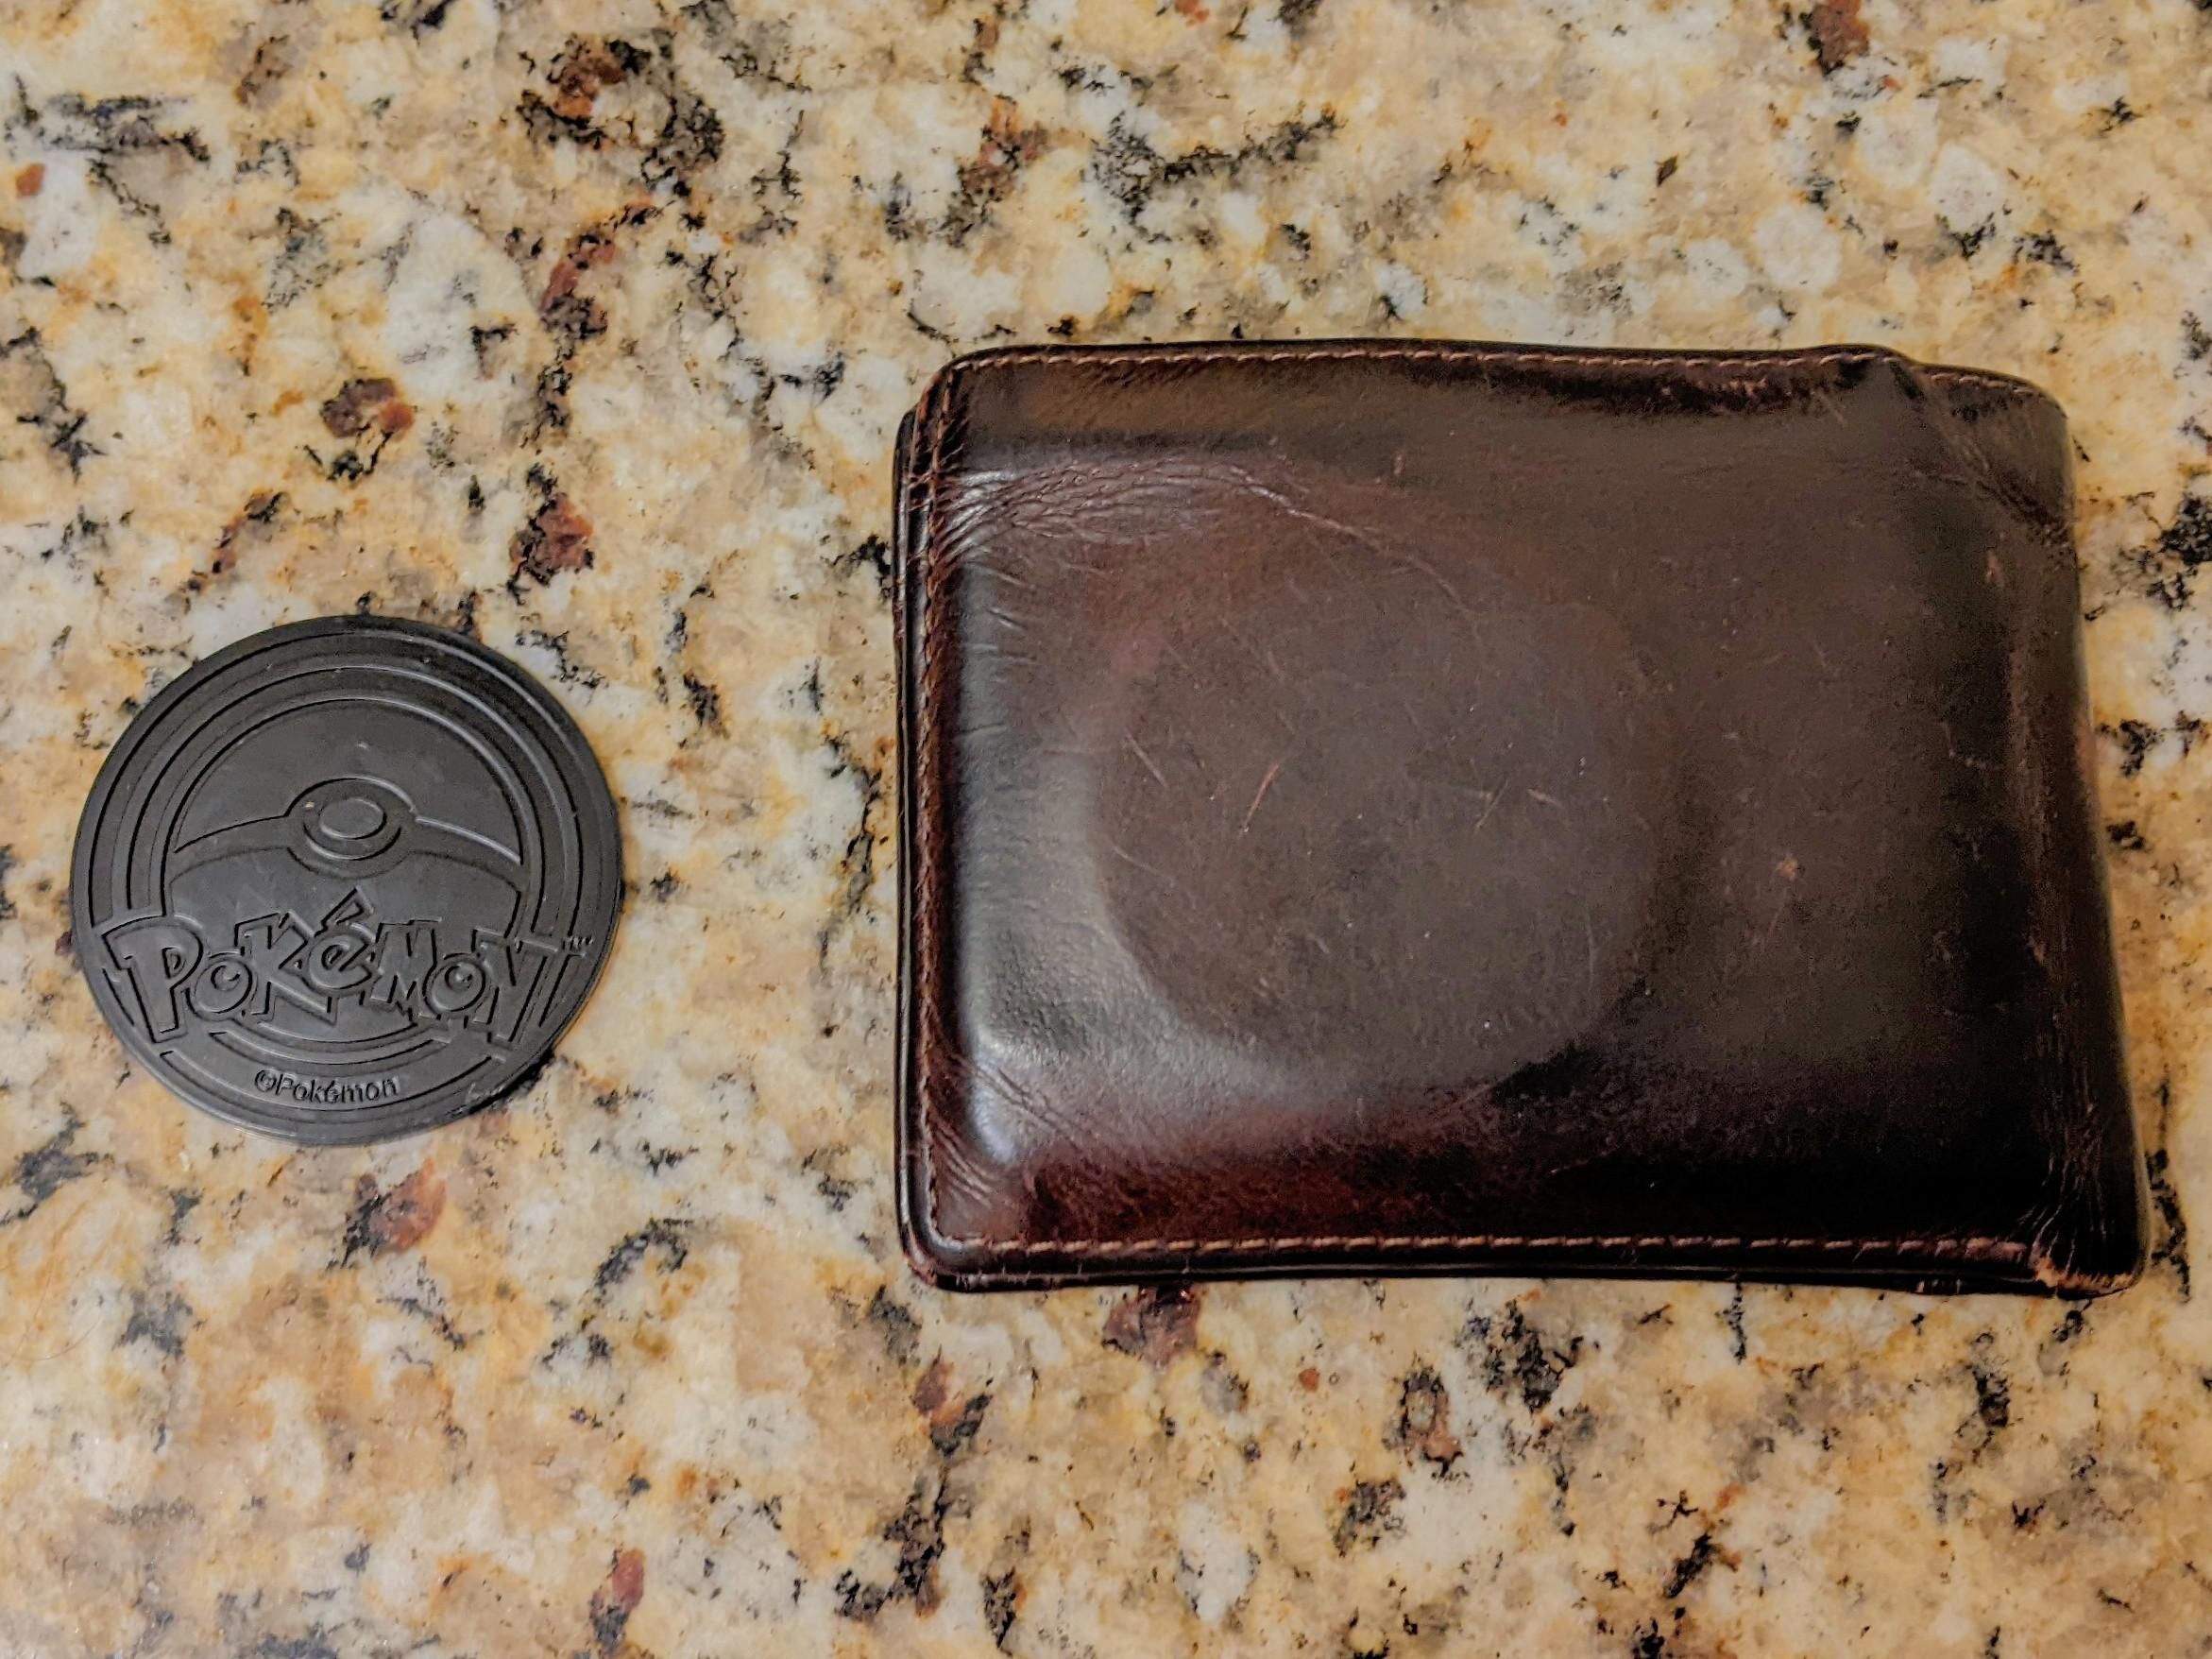 Son gave me a Pokemon coin, which I put in my wallet. Had to explain to long-term girlfriend it wasn't a condom when she saw it.